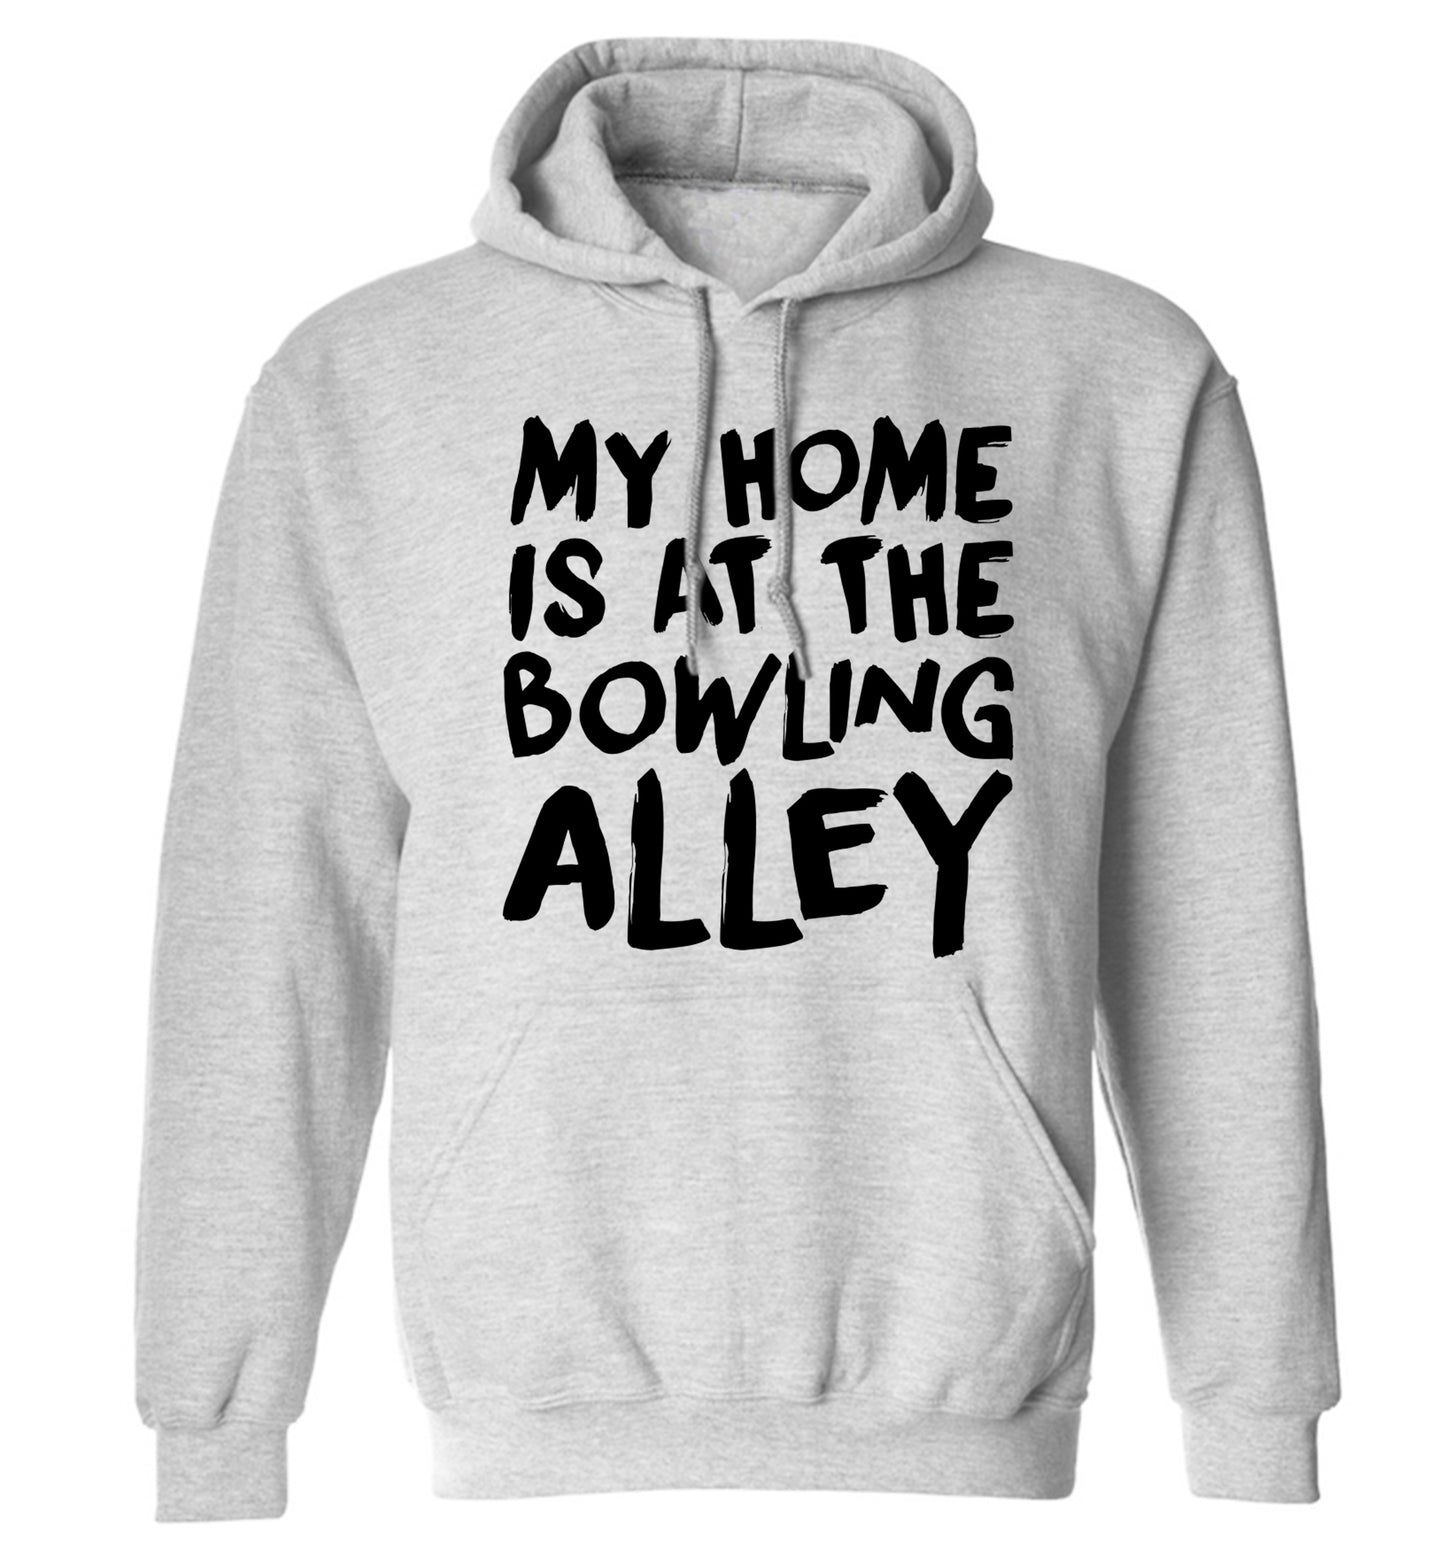 My home is at the bowling alley adults unisex grey hoodie 2XL